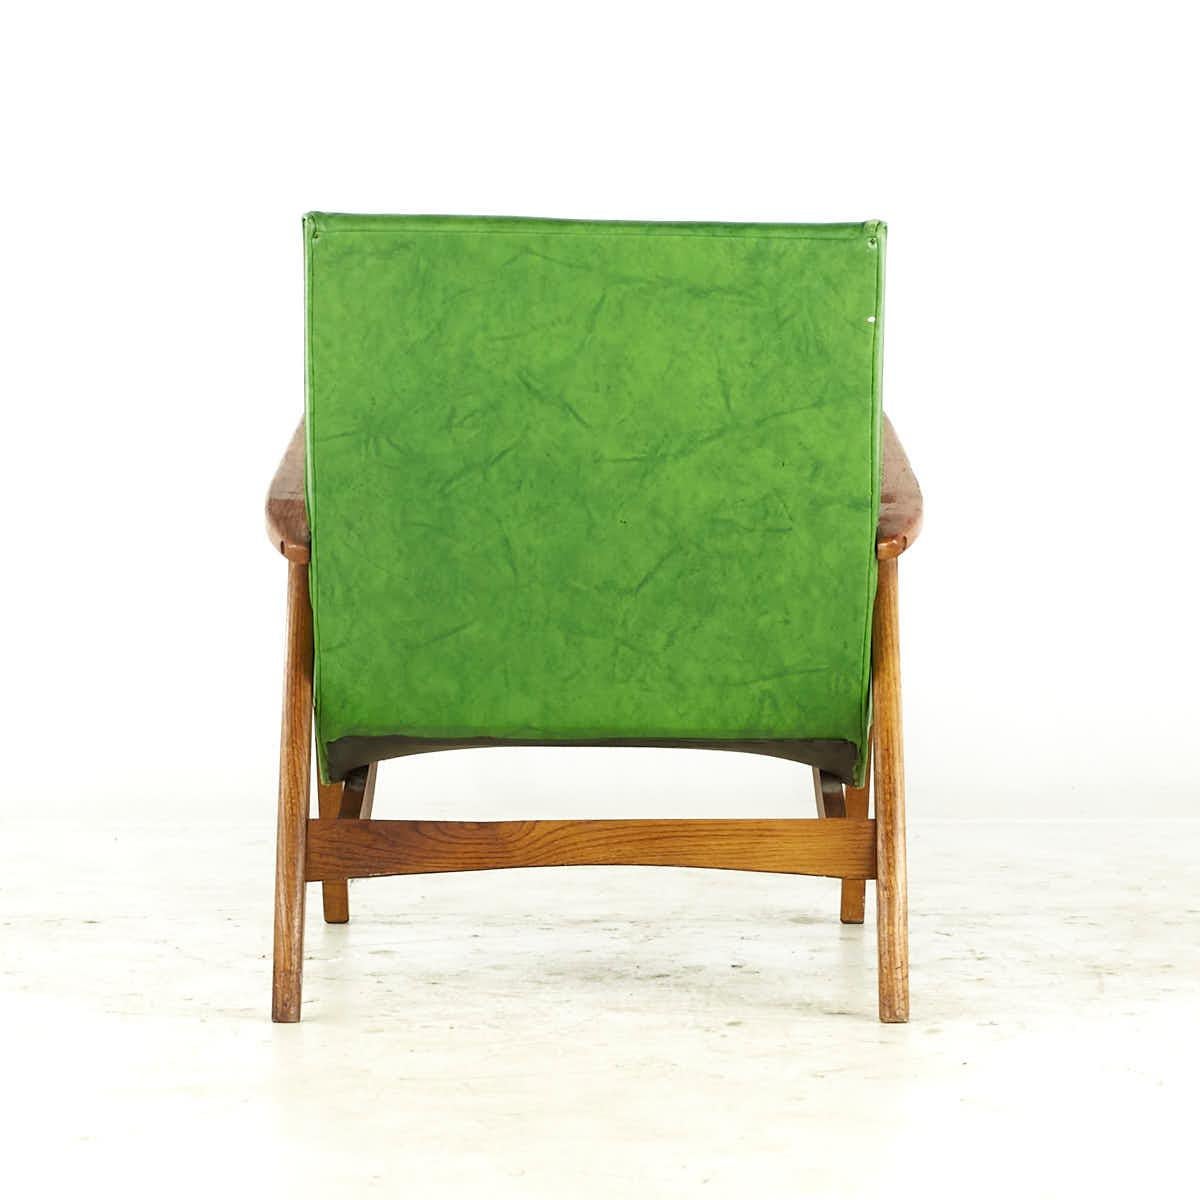 SOLD 08/07/23 Milo Baughman Mid Century Green Scoop Lounge Chairs – Pair For Sale 1